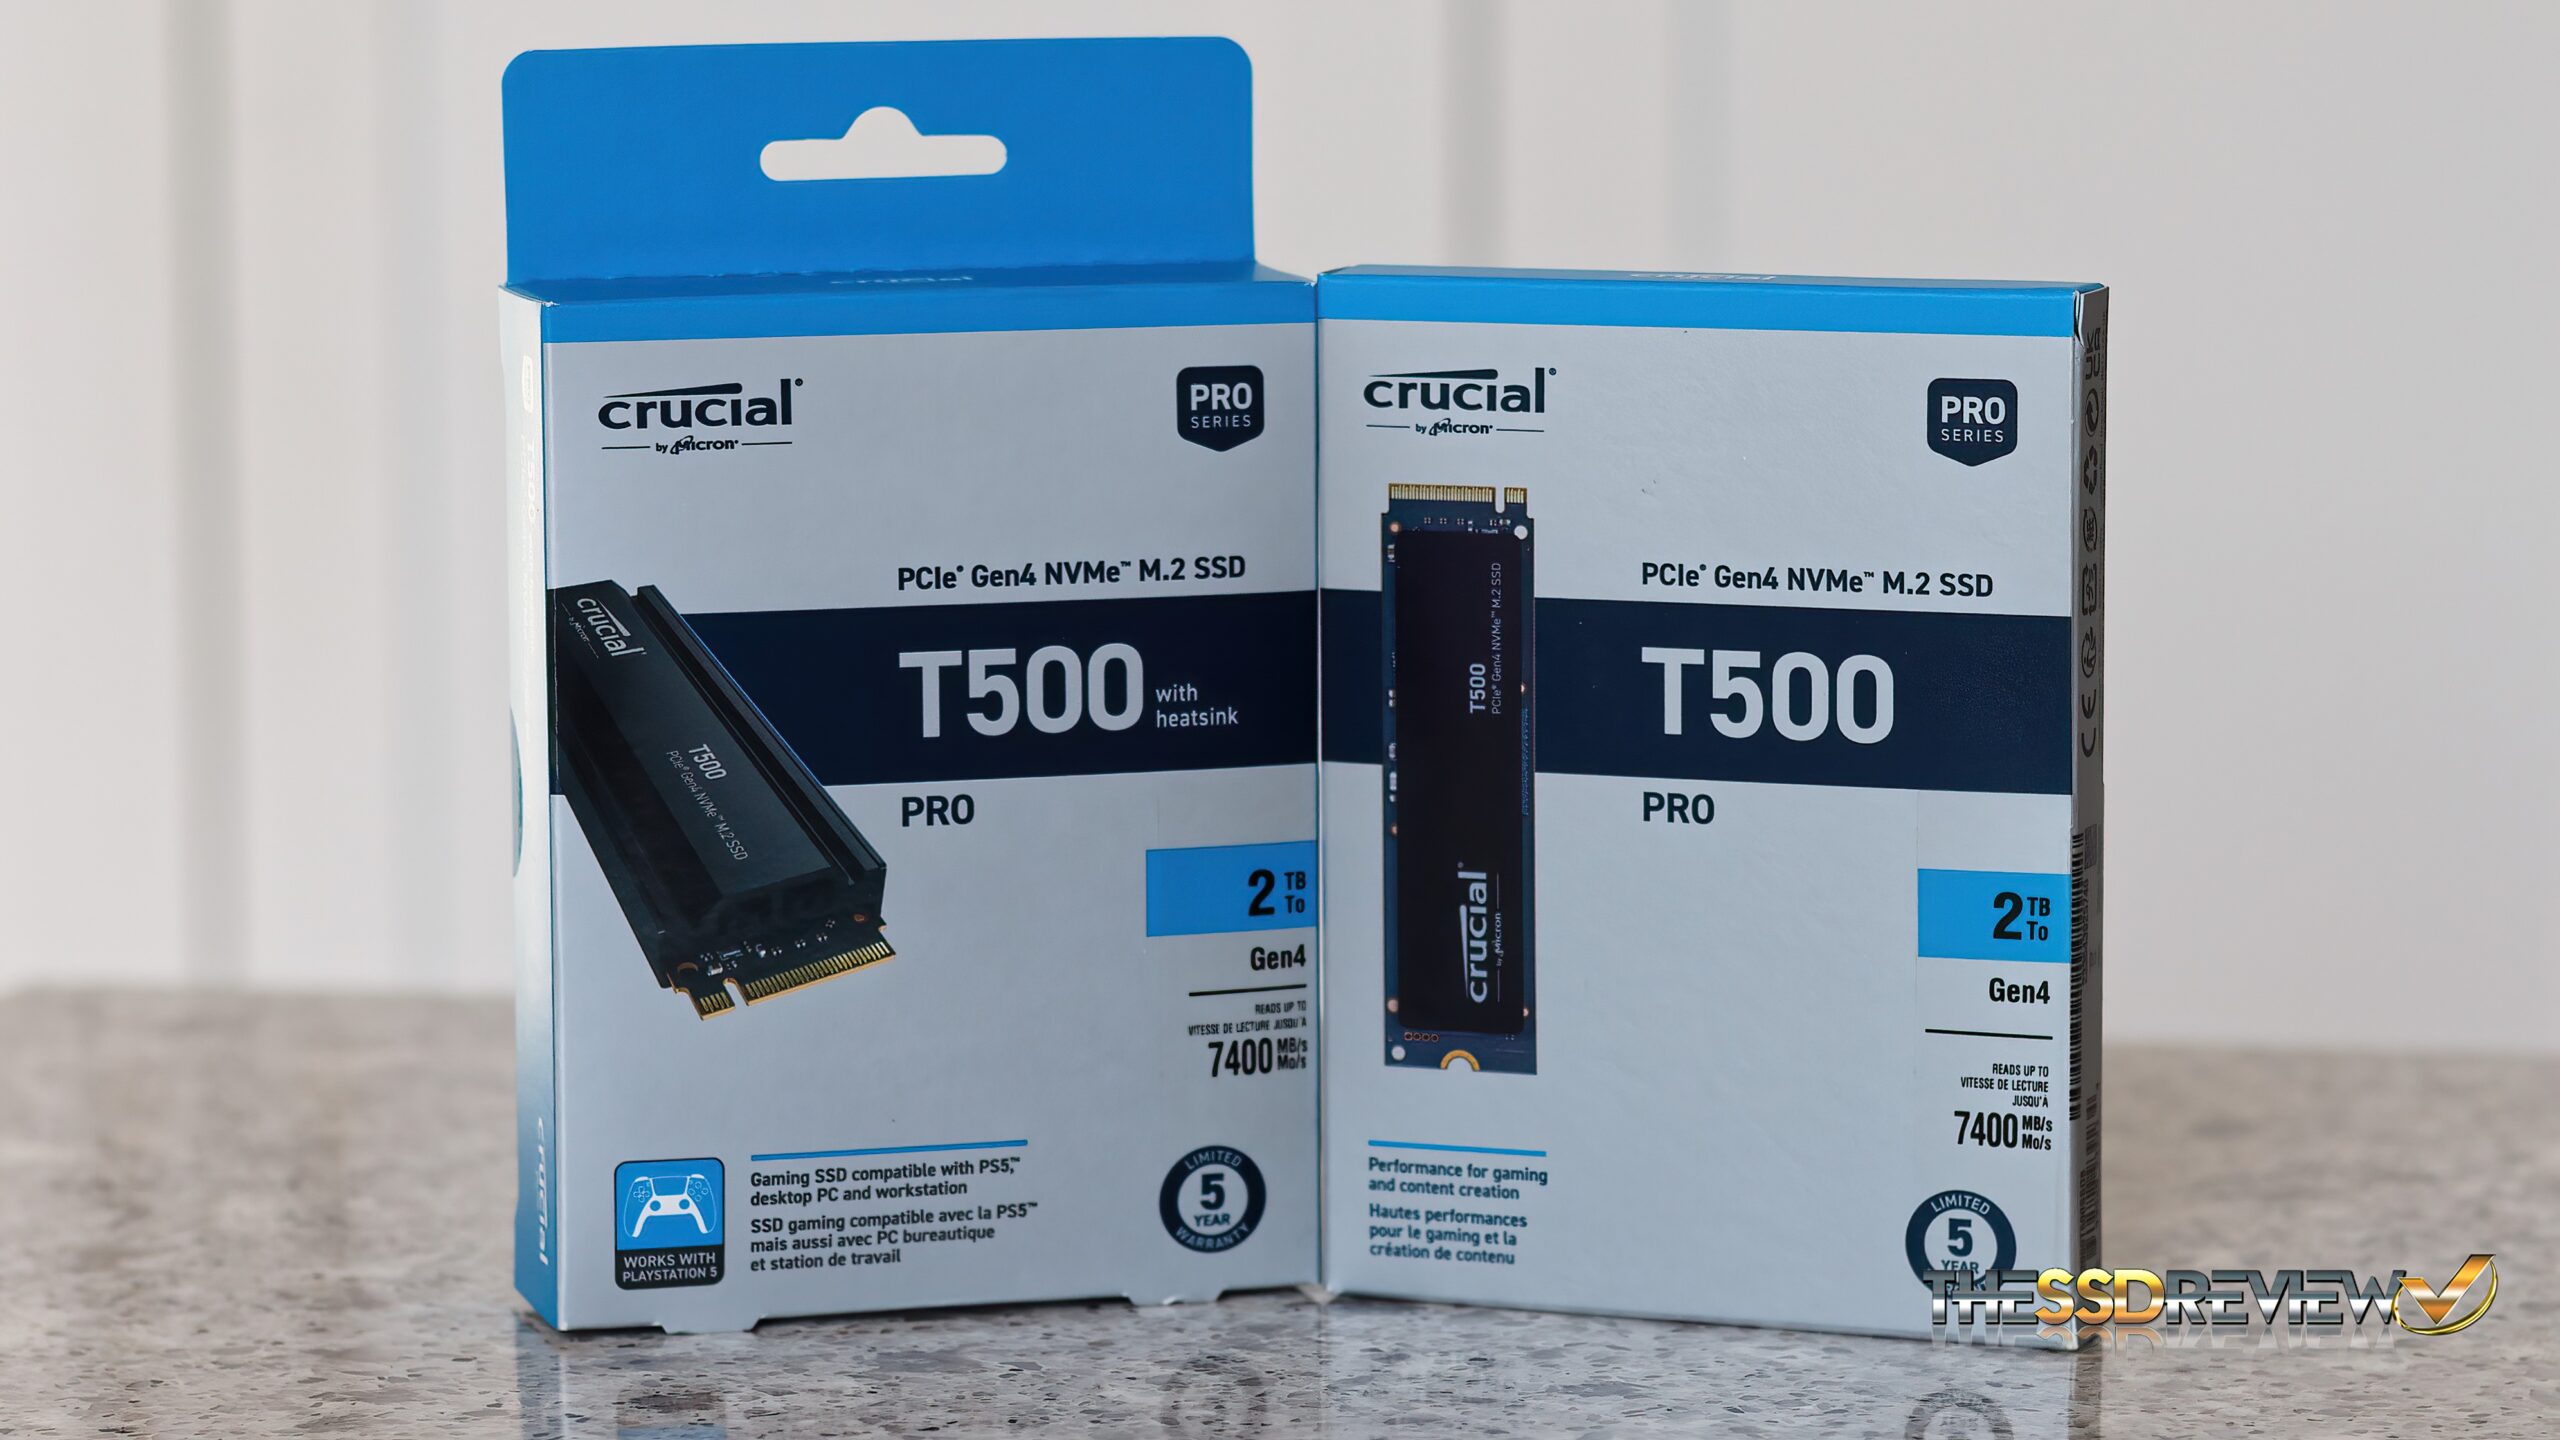 Crucial T500 2TB PCIe Gen4 NVMe SSD Review - Page 3 of 3